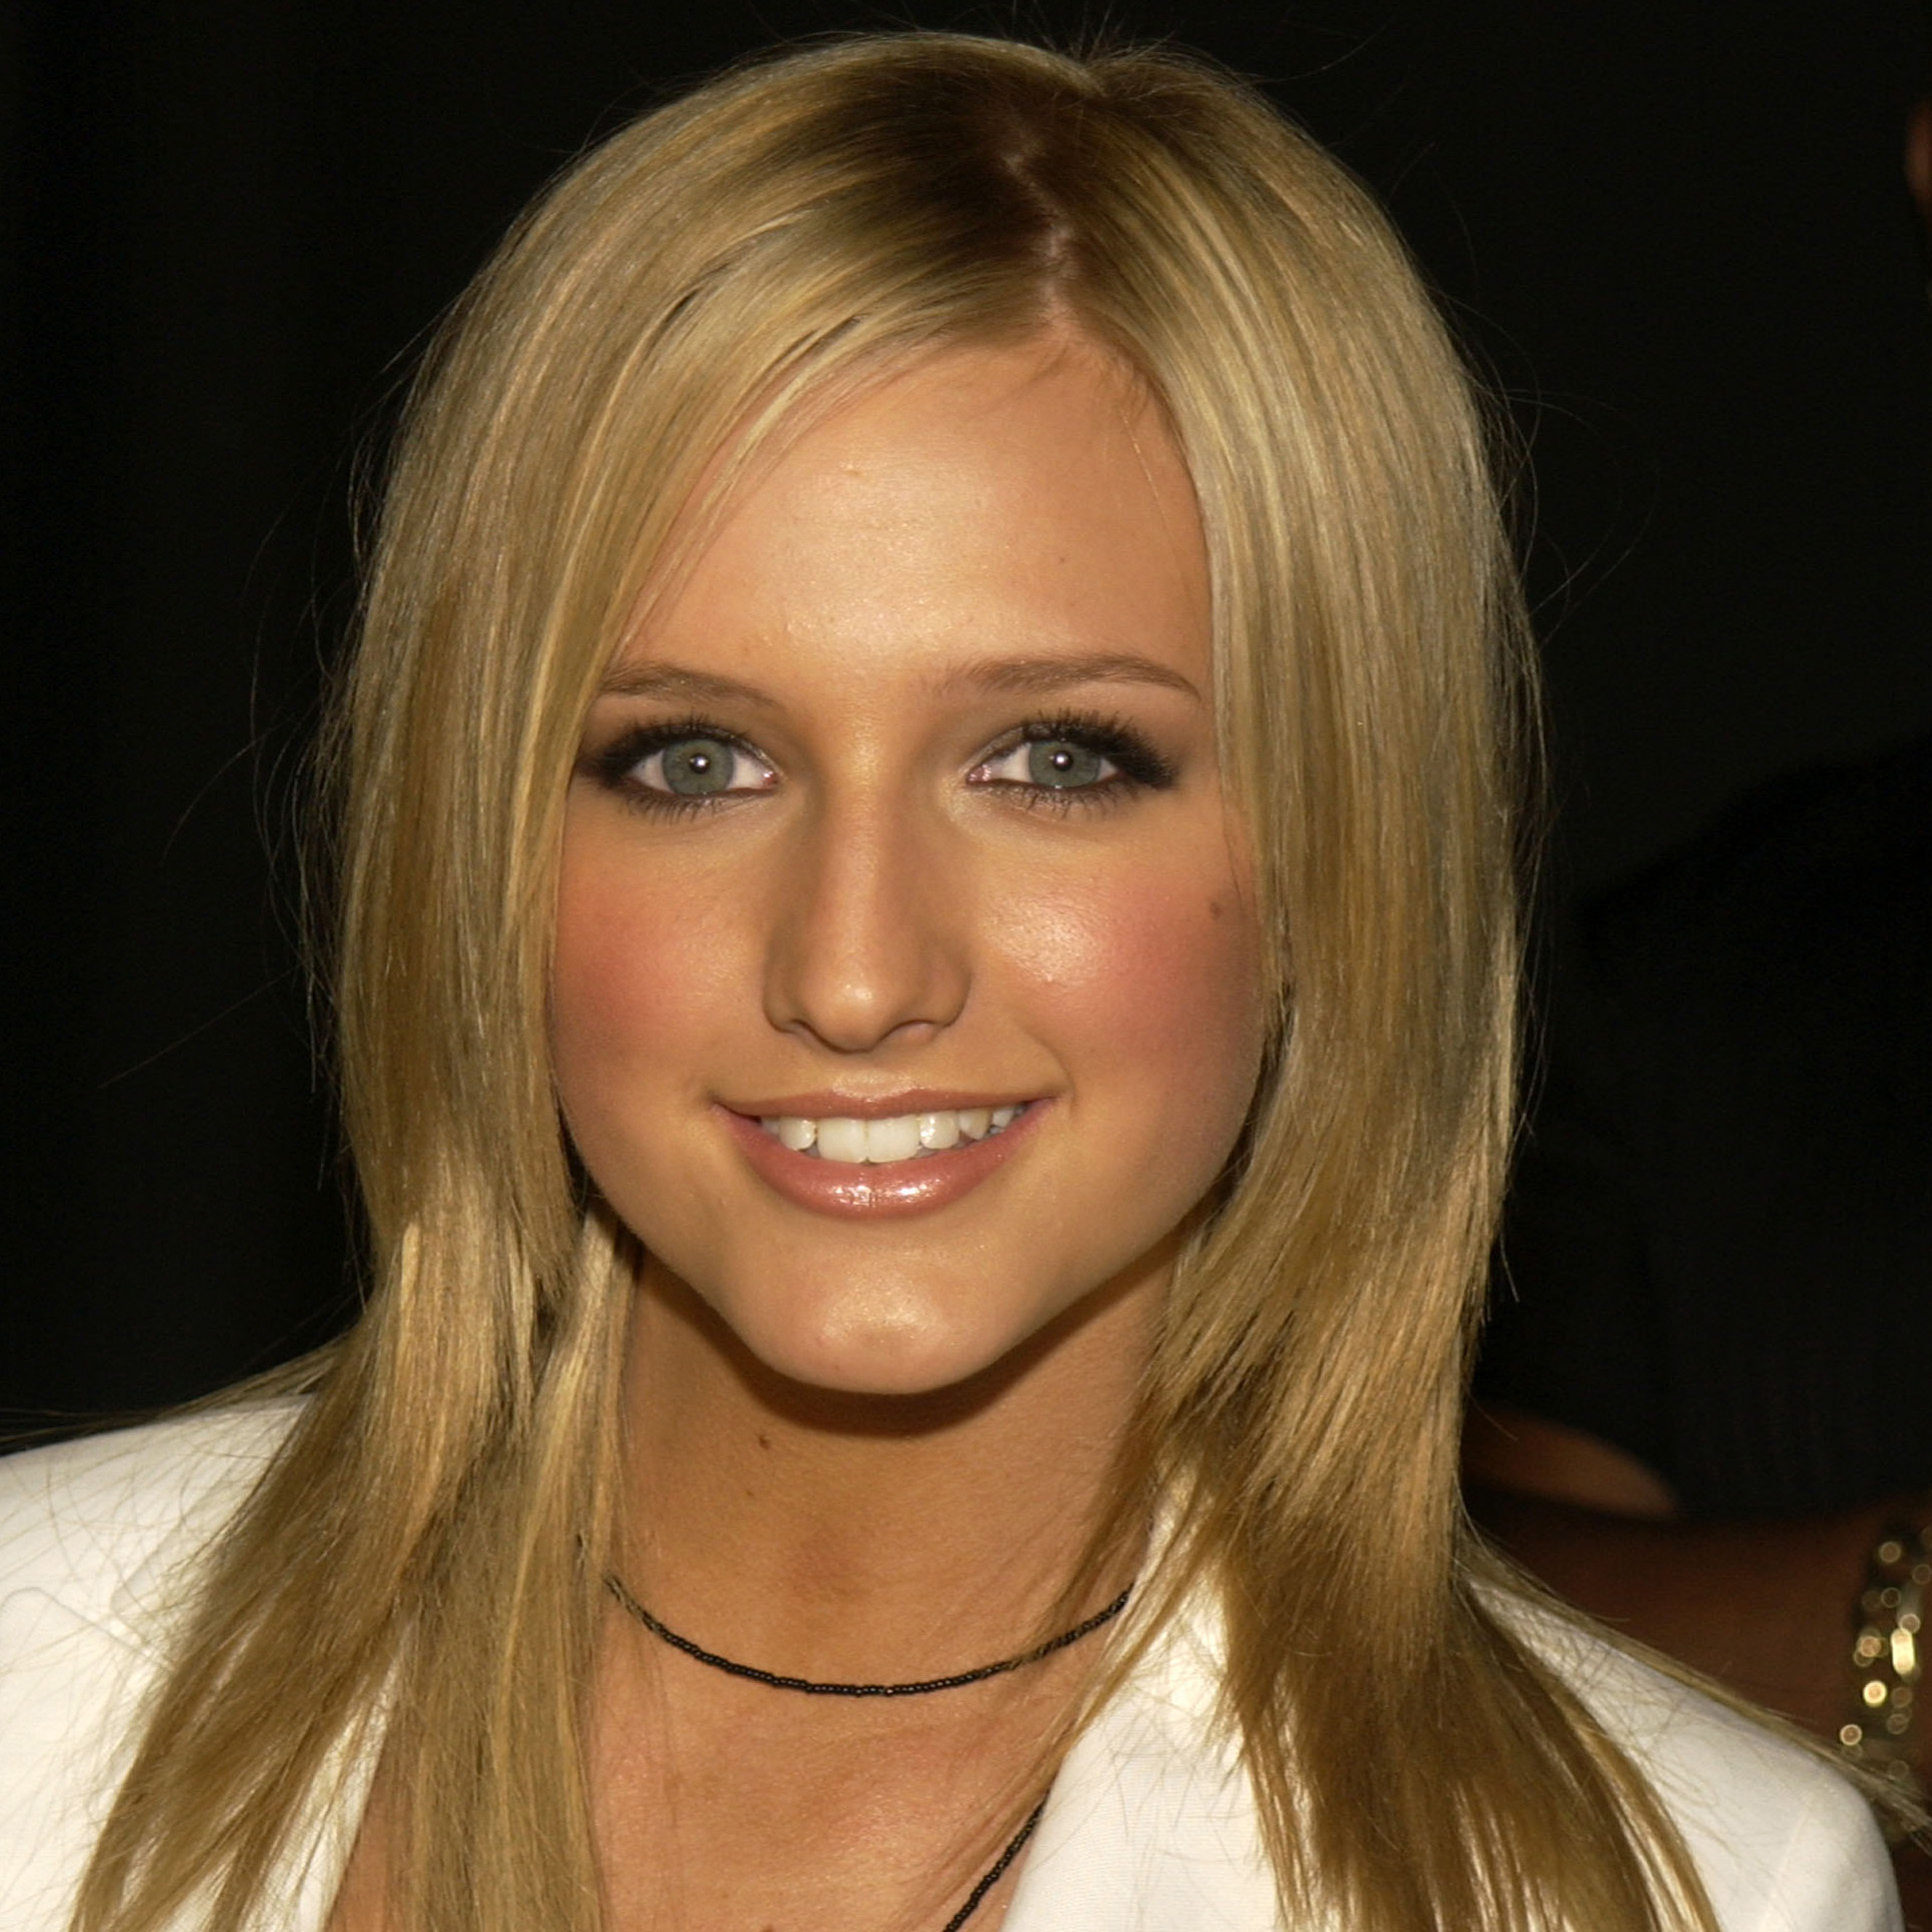 Ashlee Simpson's Transformation and Plastic Surgery Speculation